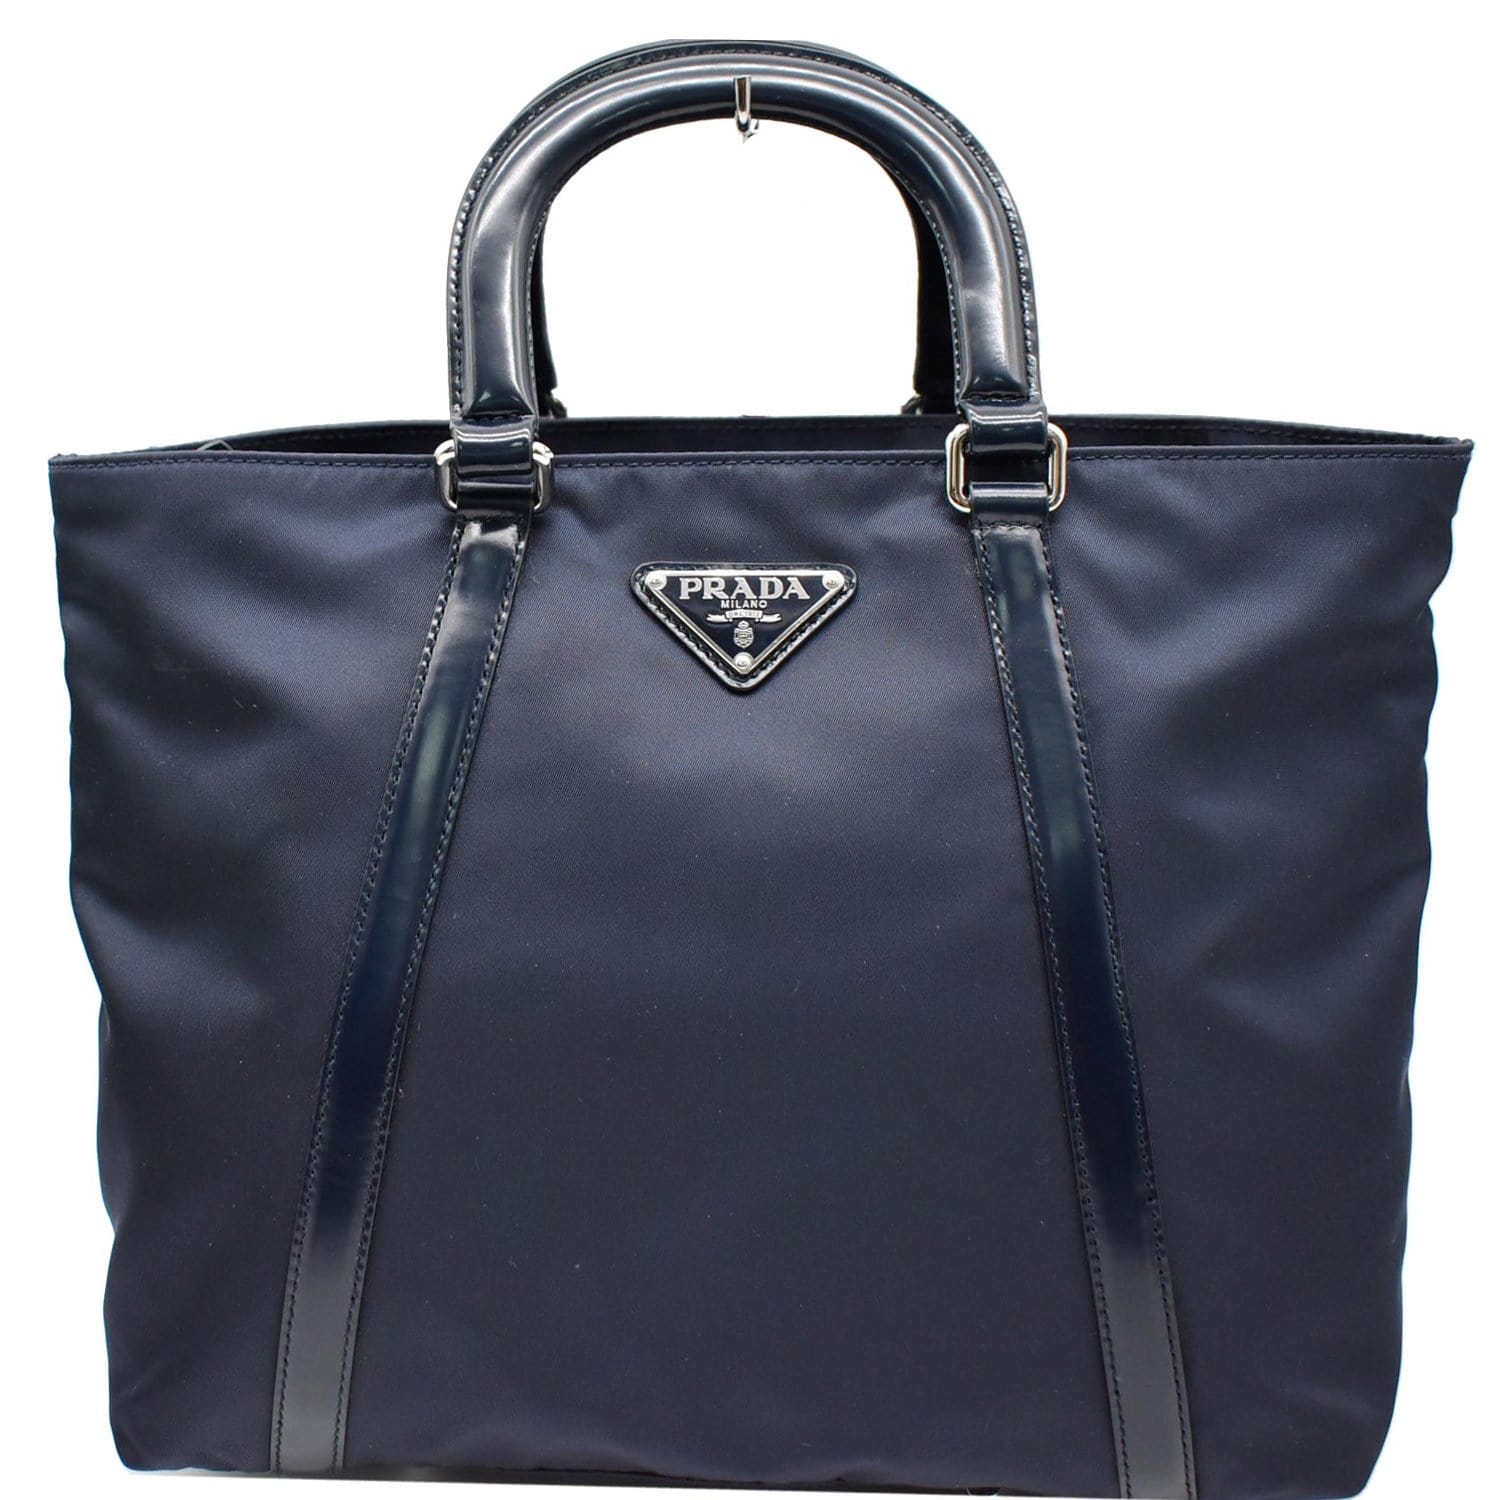 Prada Padded Nylon Shoulder Bag - New in Dust Bag - The Consignment Cafe